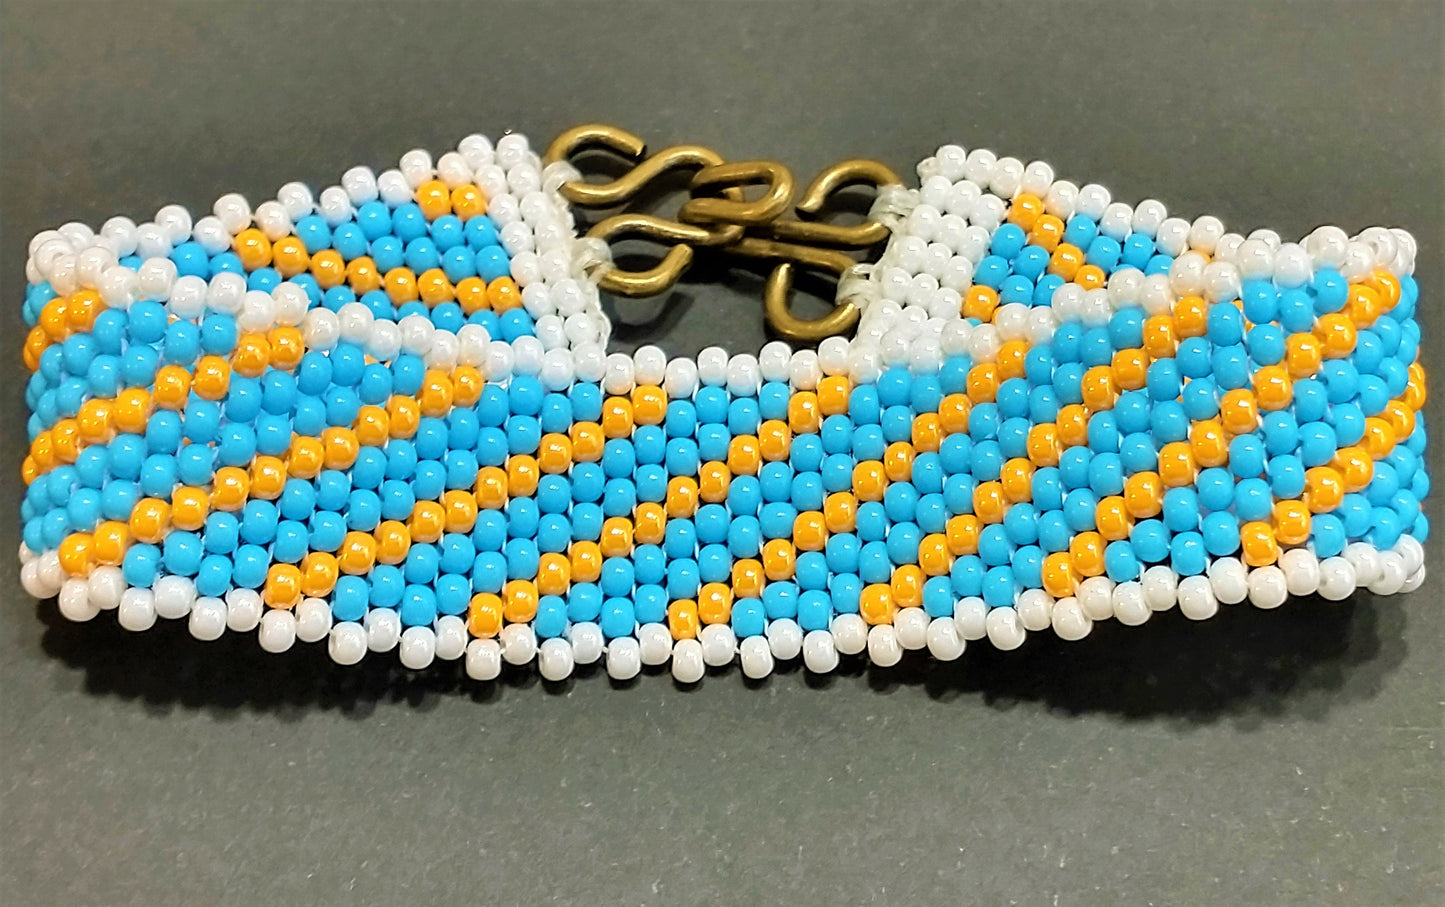 Wide Cuff Beaded Bracelet | 90s Aesthetic | Woven Beadwork | Colorful Boho Statement Bracelet | One Of A Kind Gift | Boutique Jewelry Gift